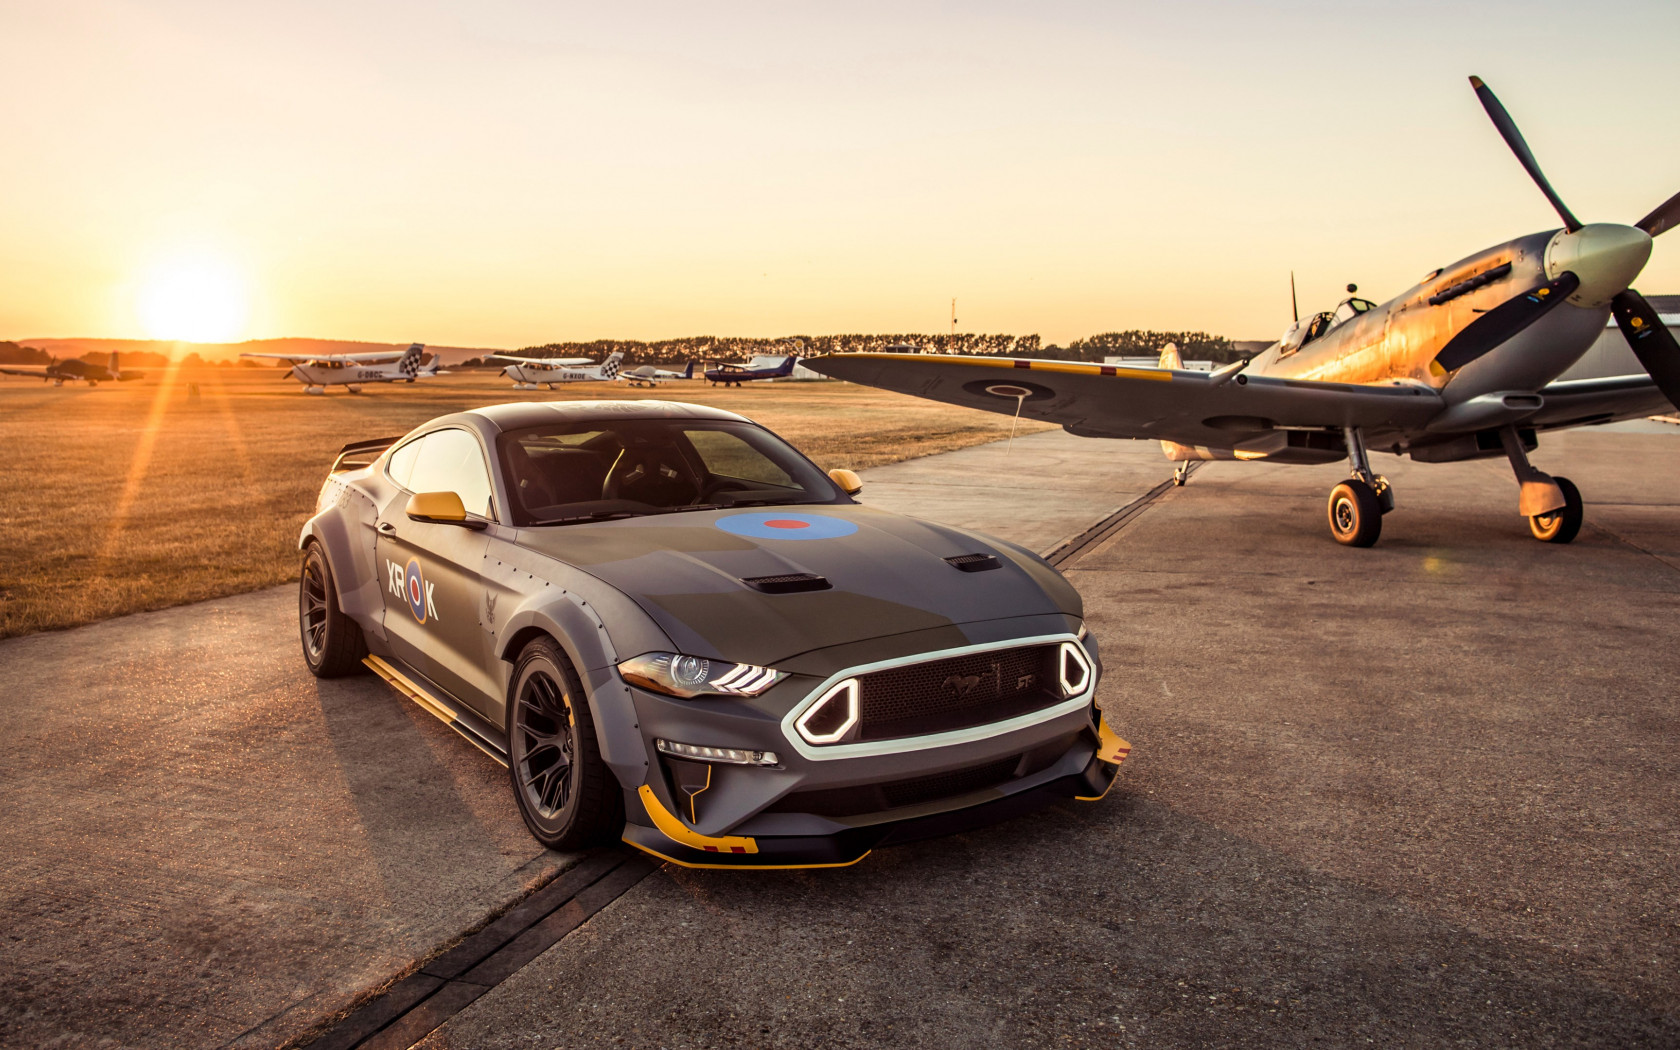 Ford Eagle Squadron Mustang GT wallpaper 1680x1050